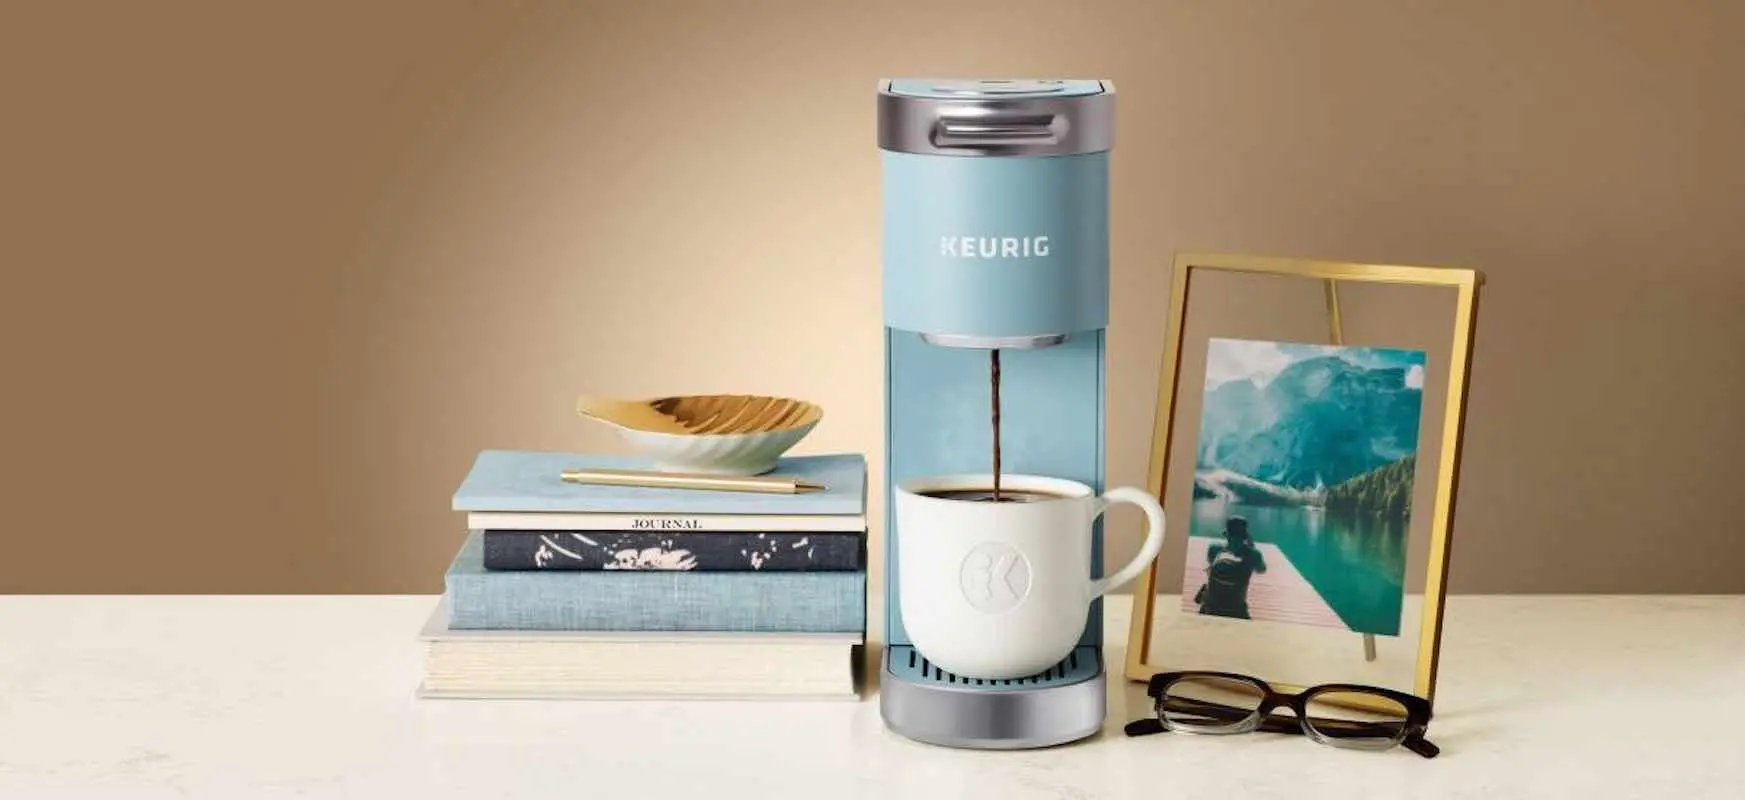 12 must-have small appliances for dorm rooms